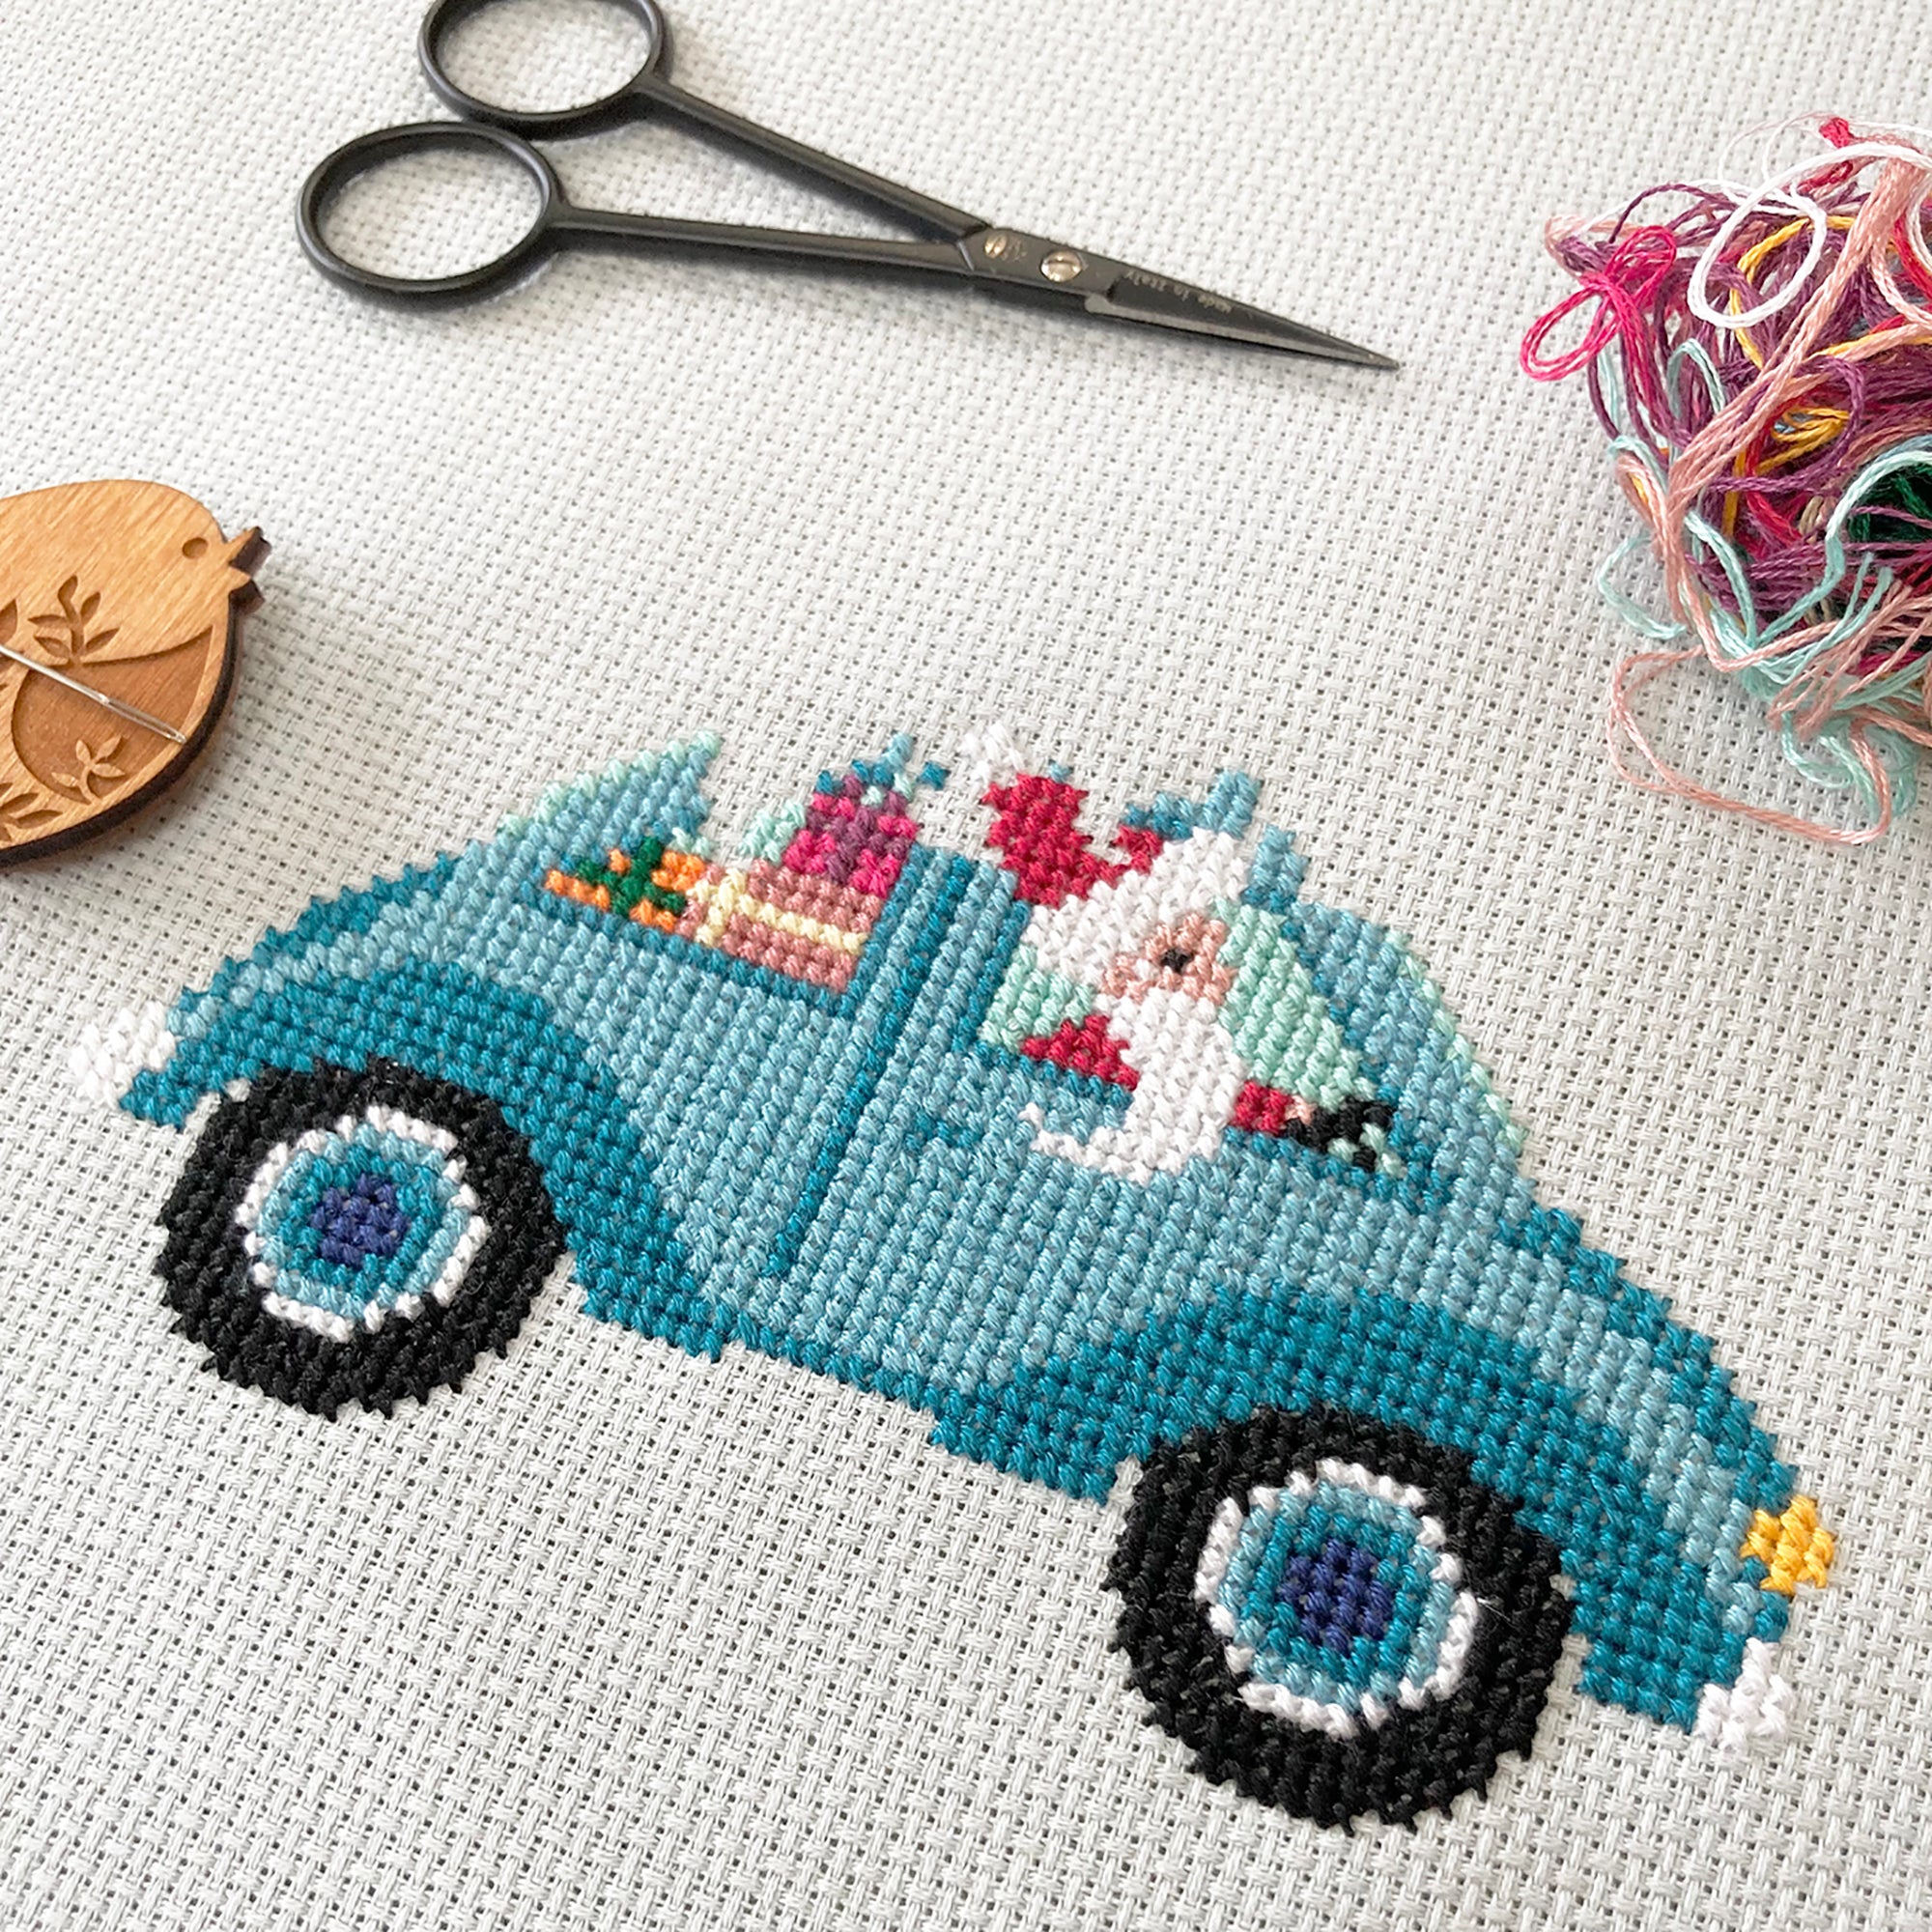 Driving Home for Christmas - PDF Pattern